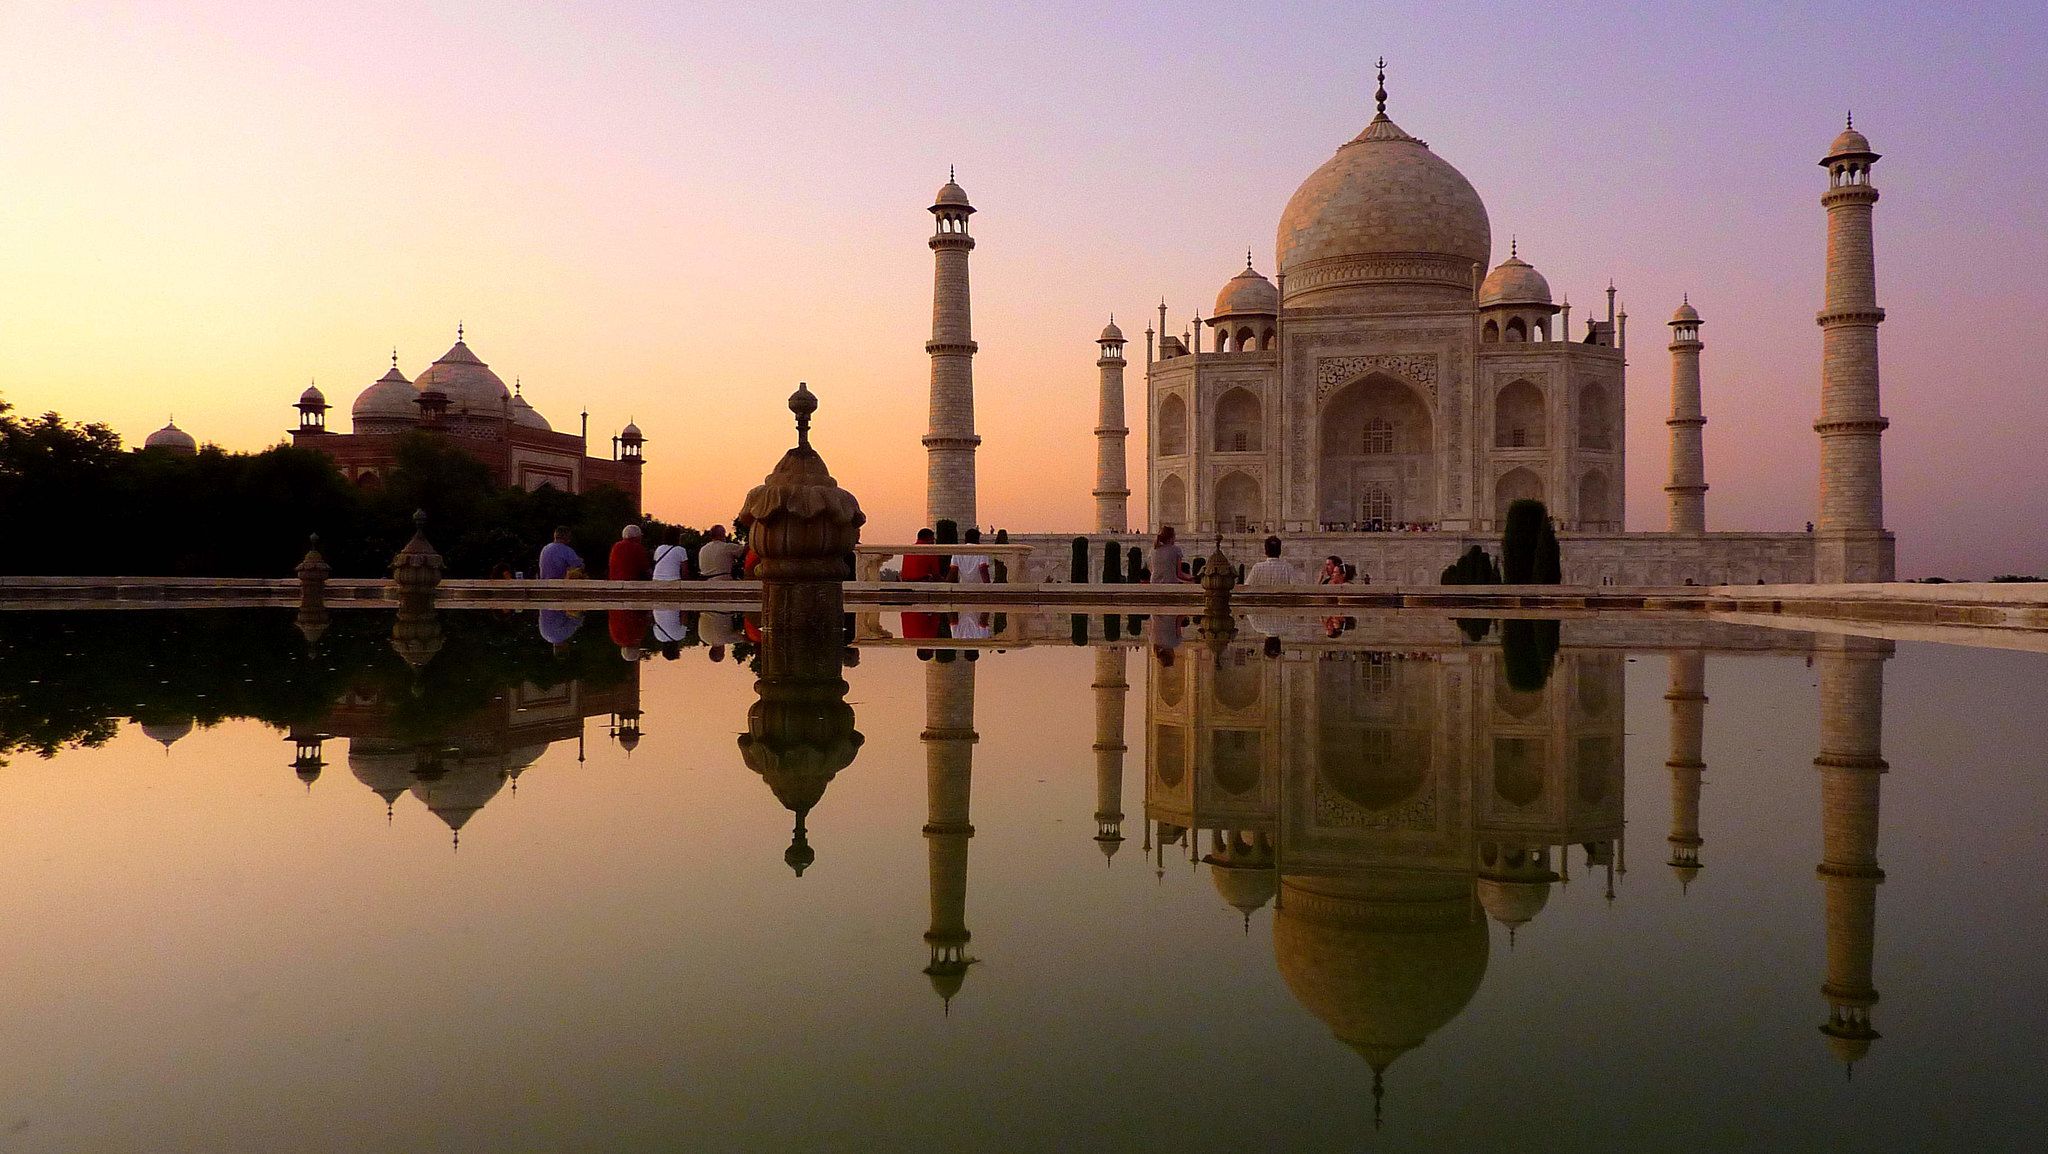 A Picture Of The Taj Mahal